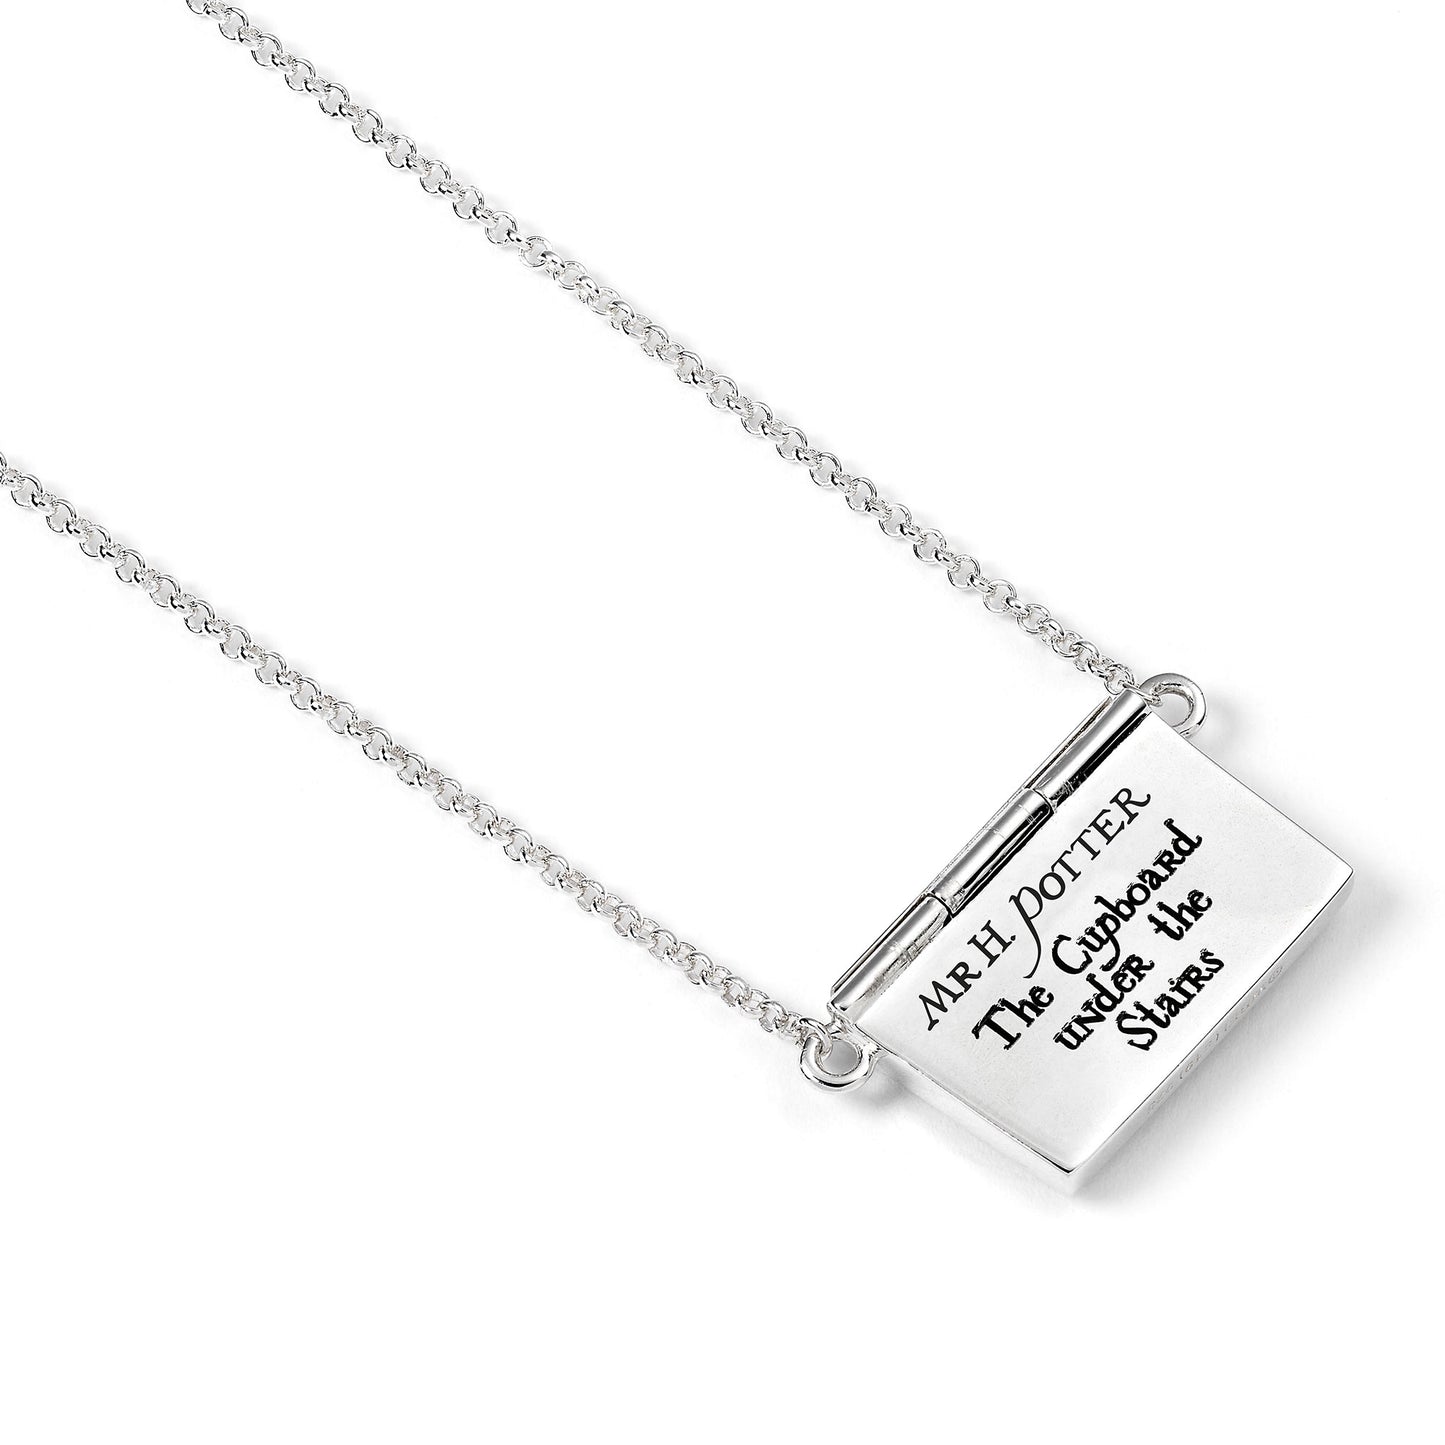 Harry Potter Hogwarts Acceptance Letter with Opening Envelope feature Necklace- Non Personalised Replica- Sterling Silver